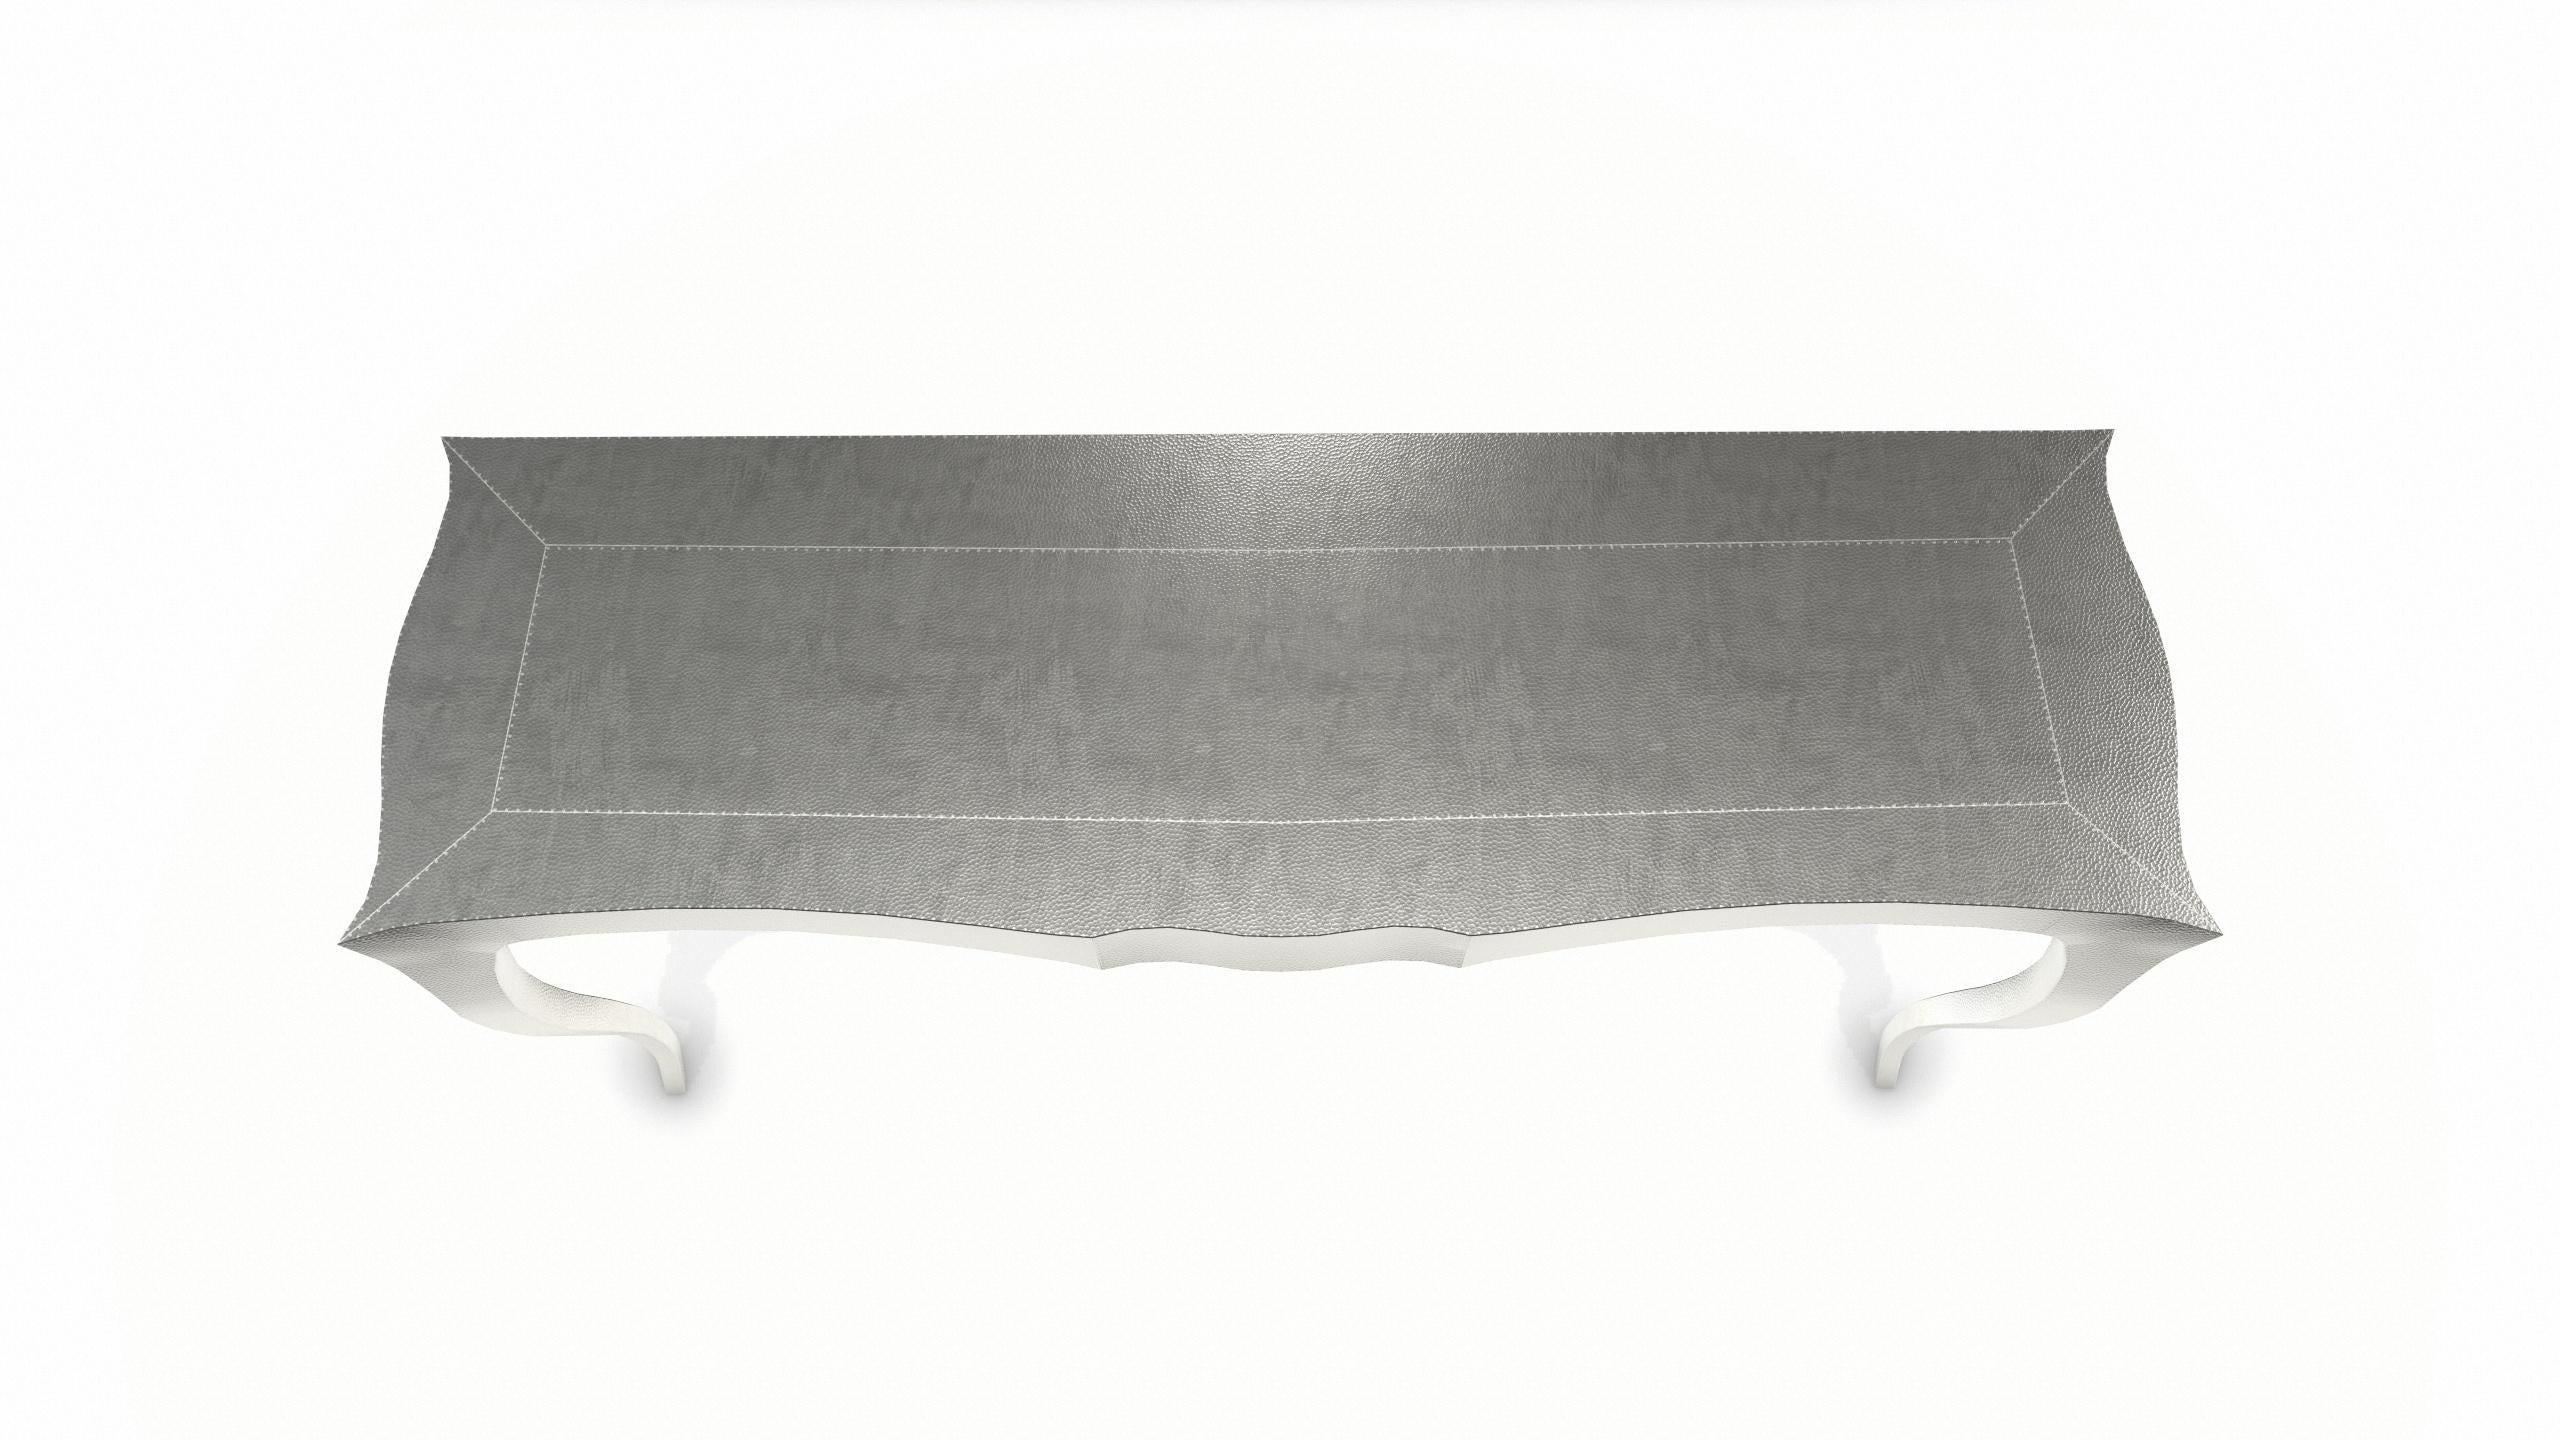 Metal Louise Console Art Deco Center Tables Mid. Hammered White Bronze by Paul Mathieu For Sale